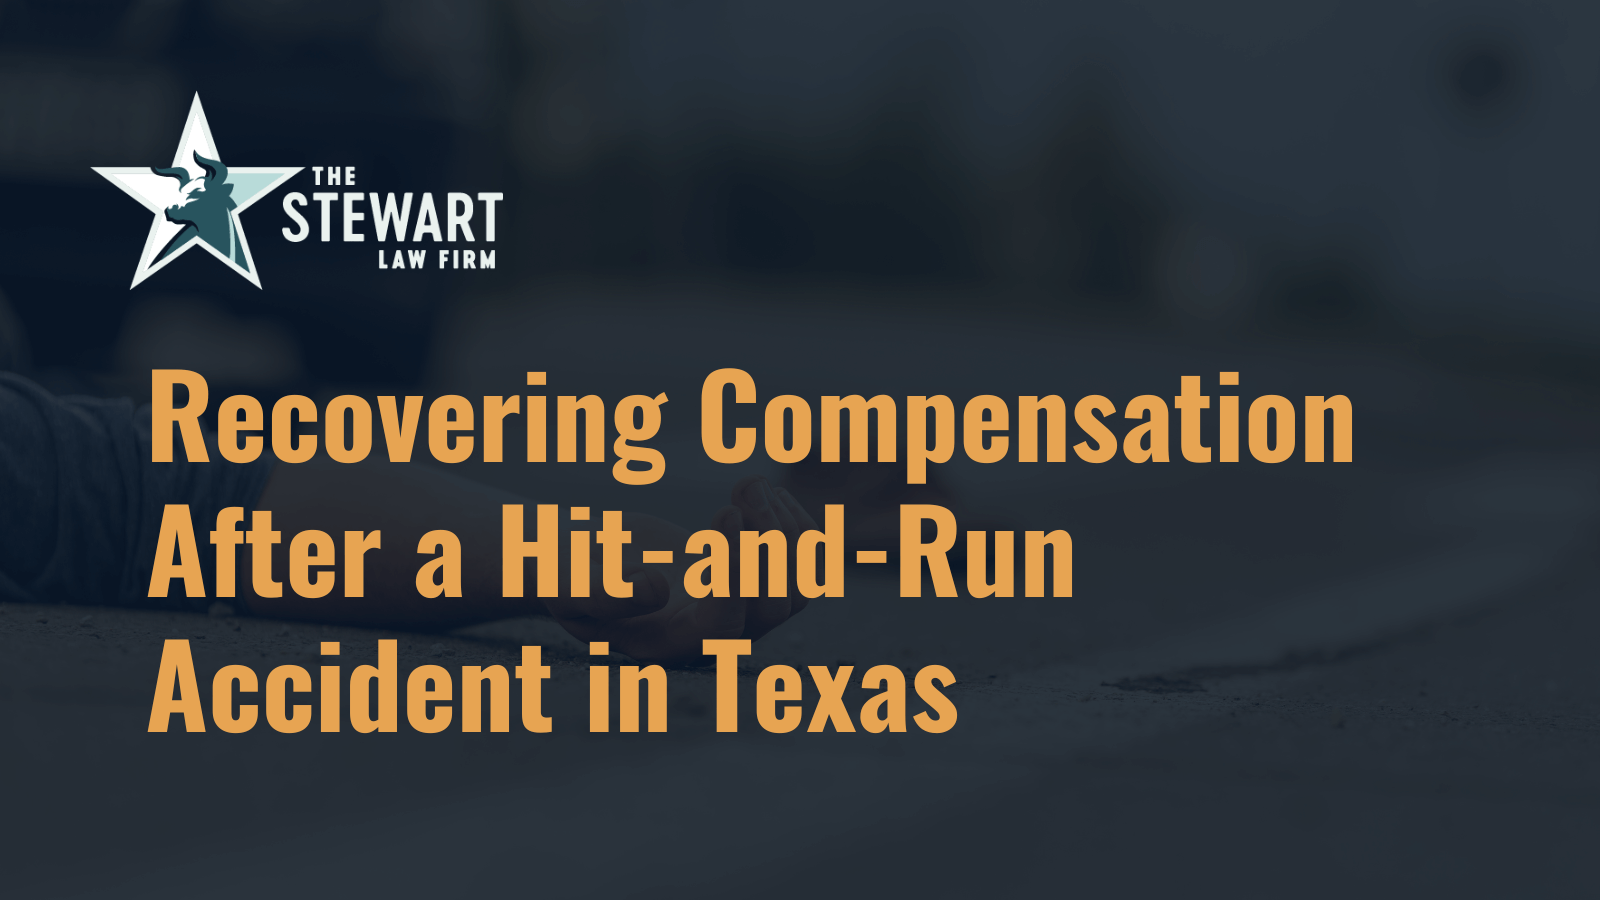 Recovering Compensation After a Hit-and-Run Accident in Texas - the stephen stewart law firm - austin texas personal injury lawyer